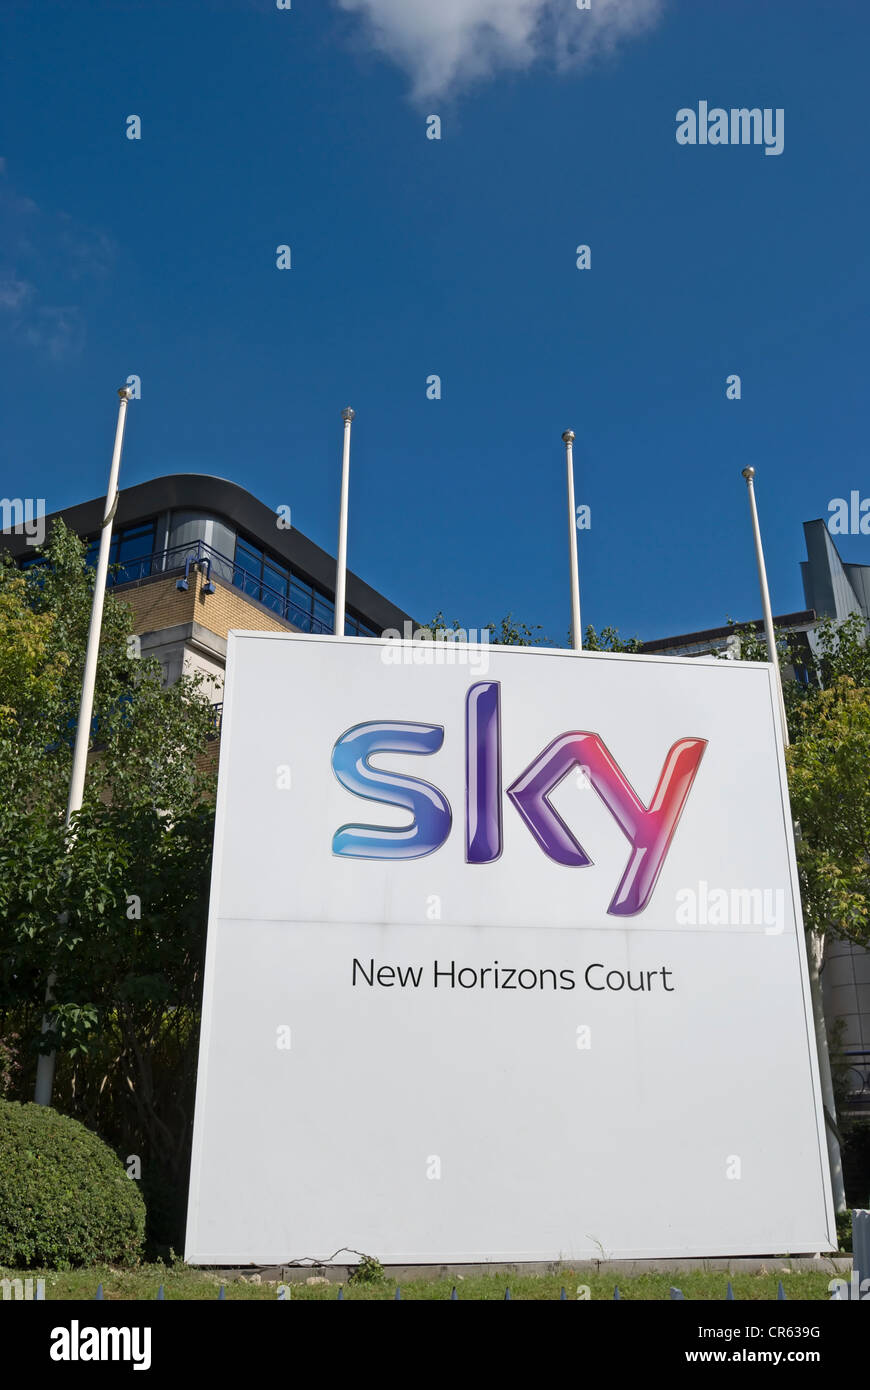 new horizons court, pictured when still part of the headquarters of sky tv, isleworth, west london, england Stock Photo